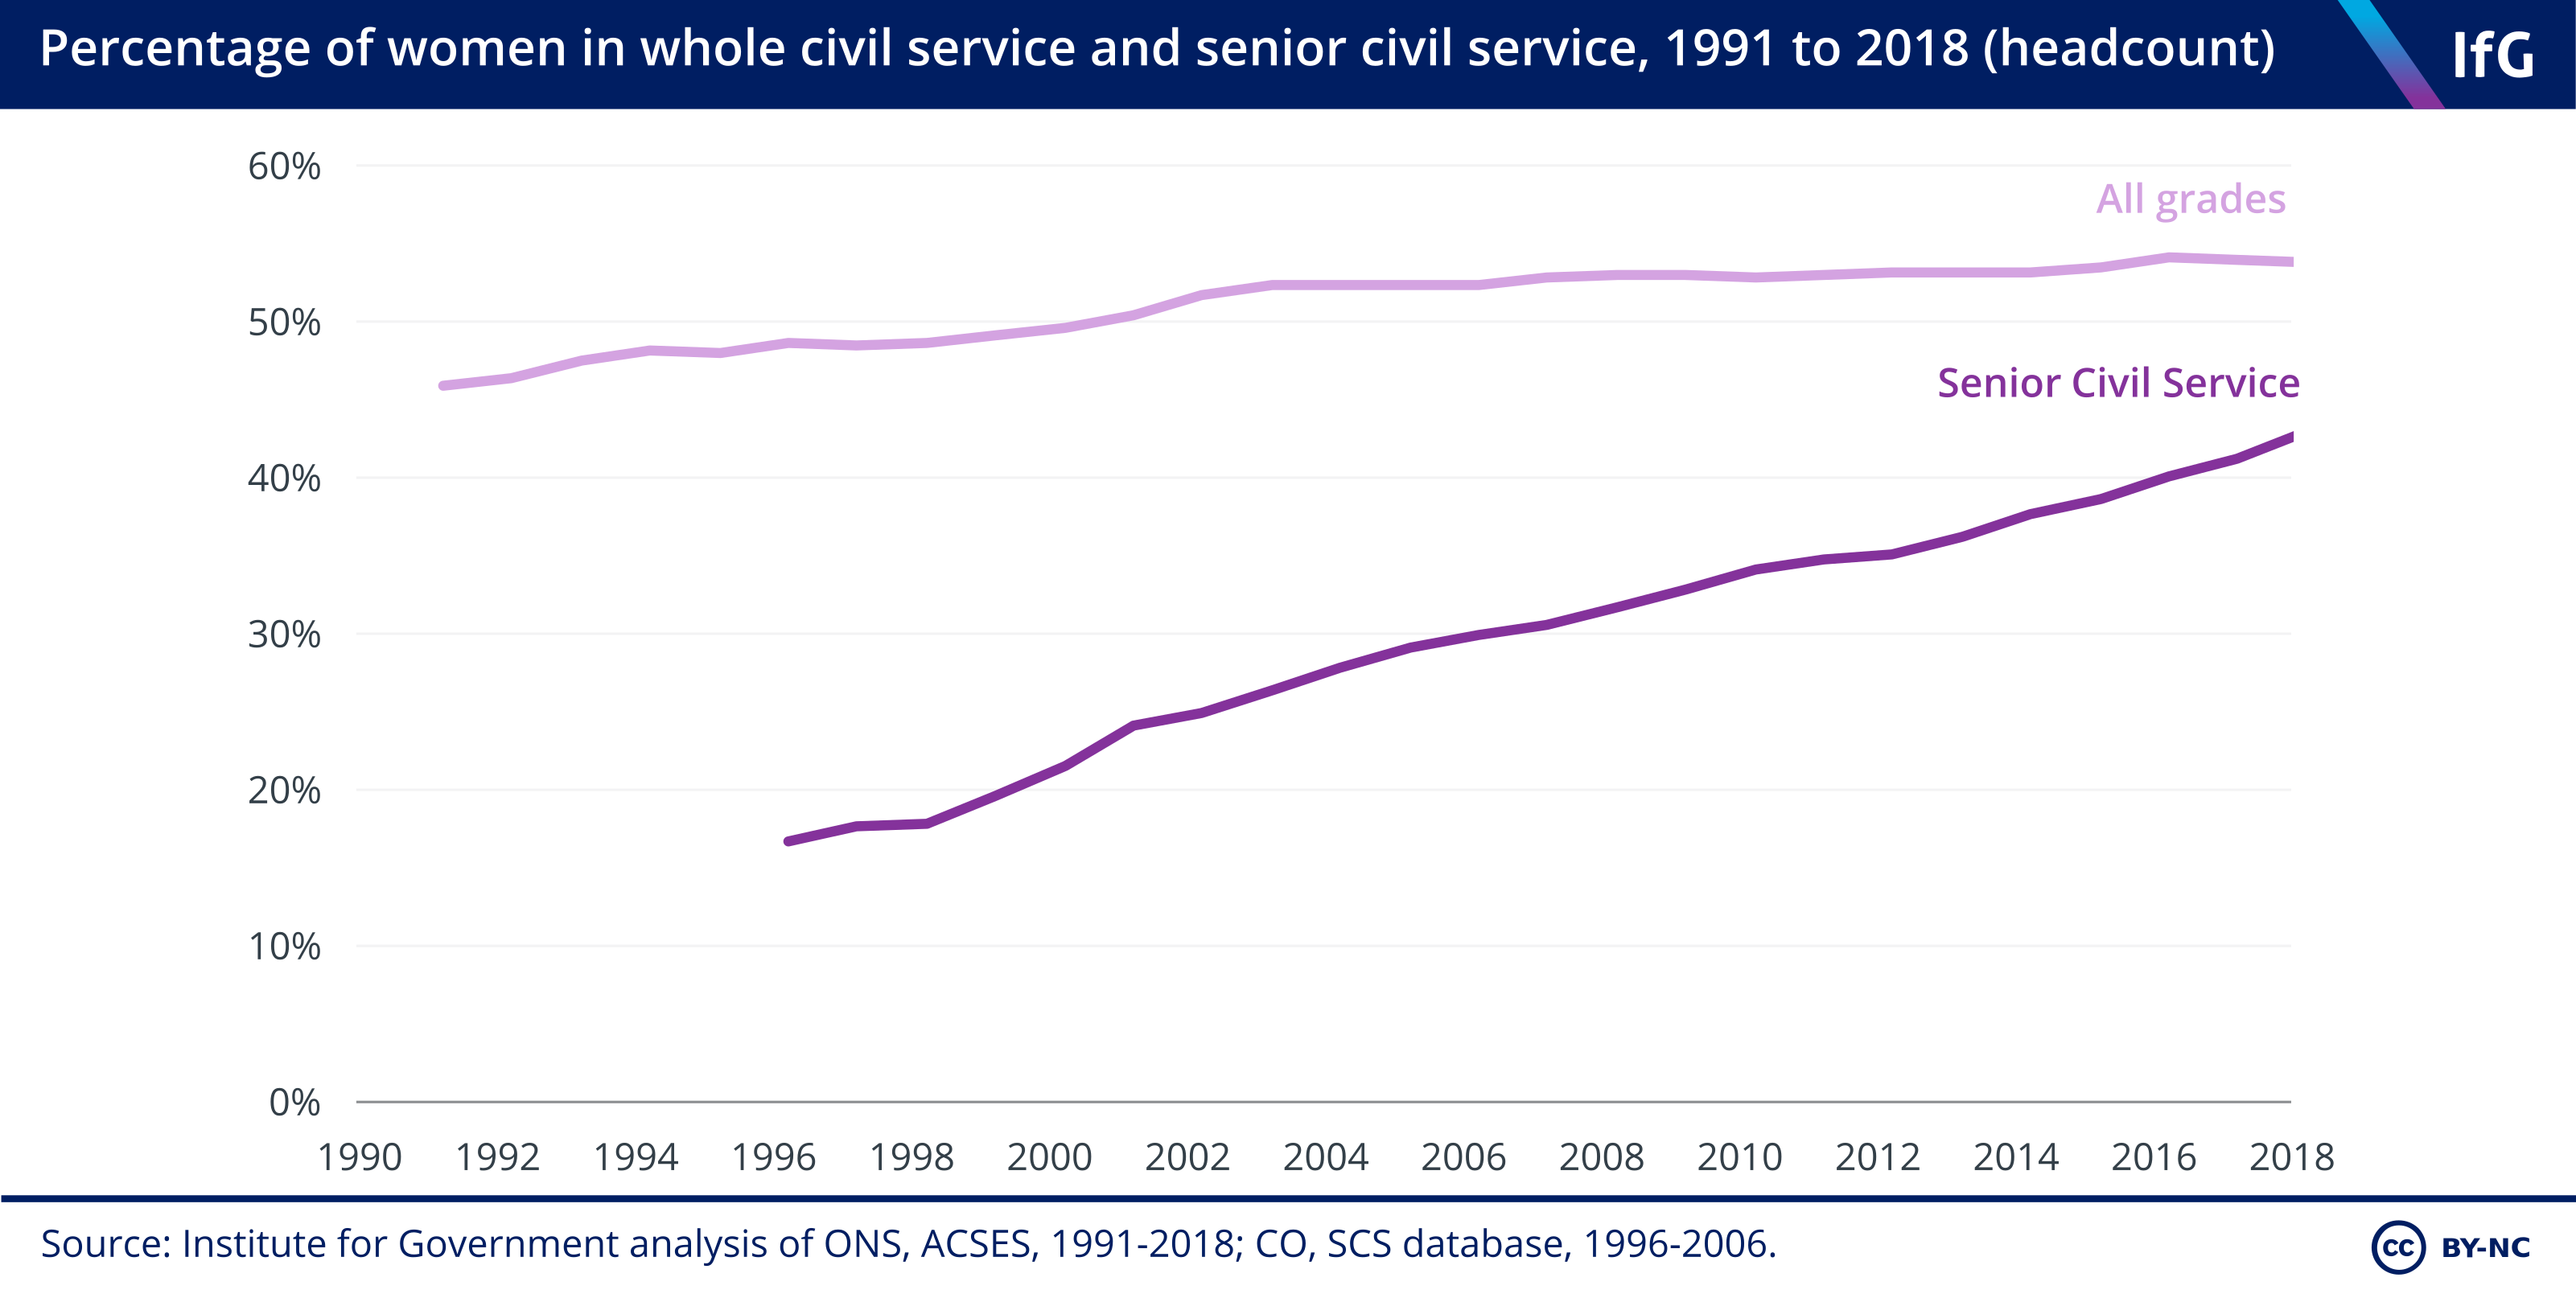 Percentage of women in civil service from 1990 to 2018